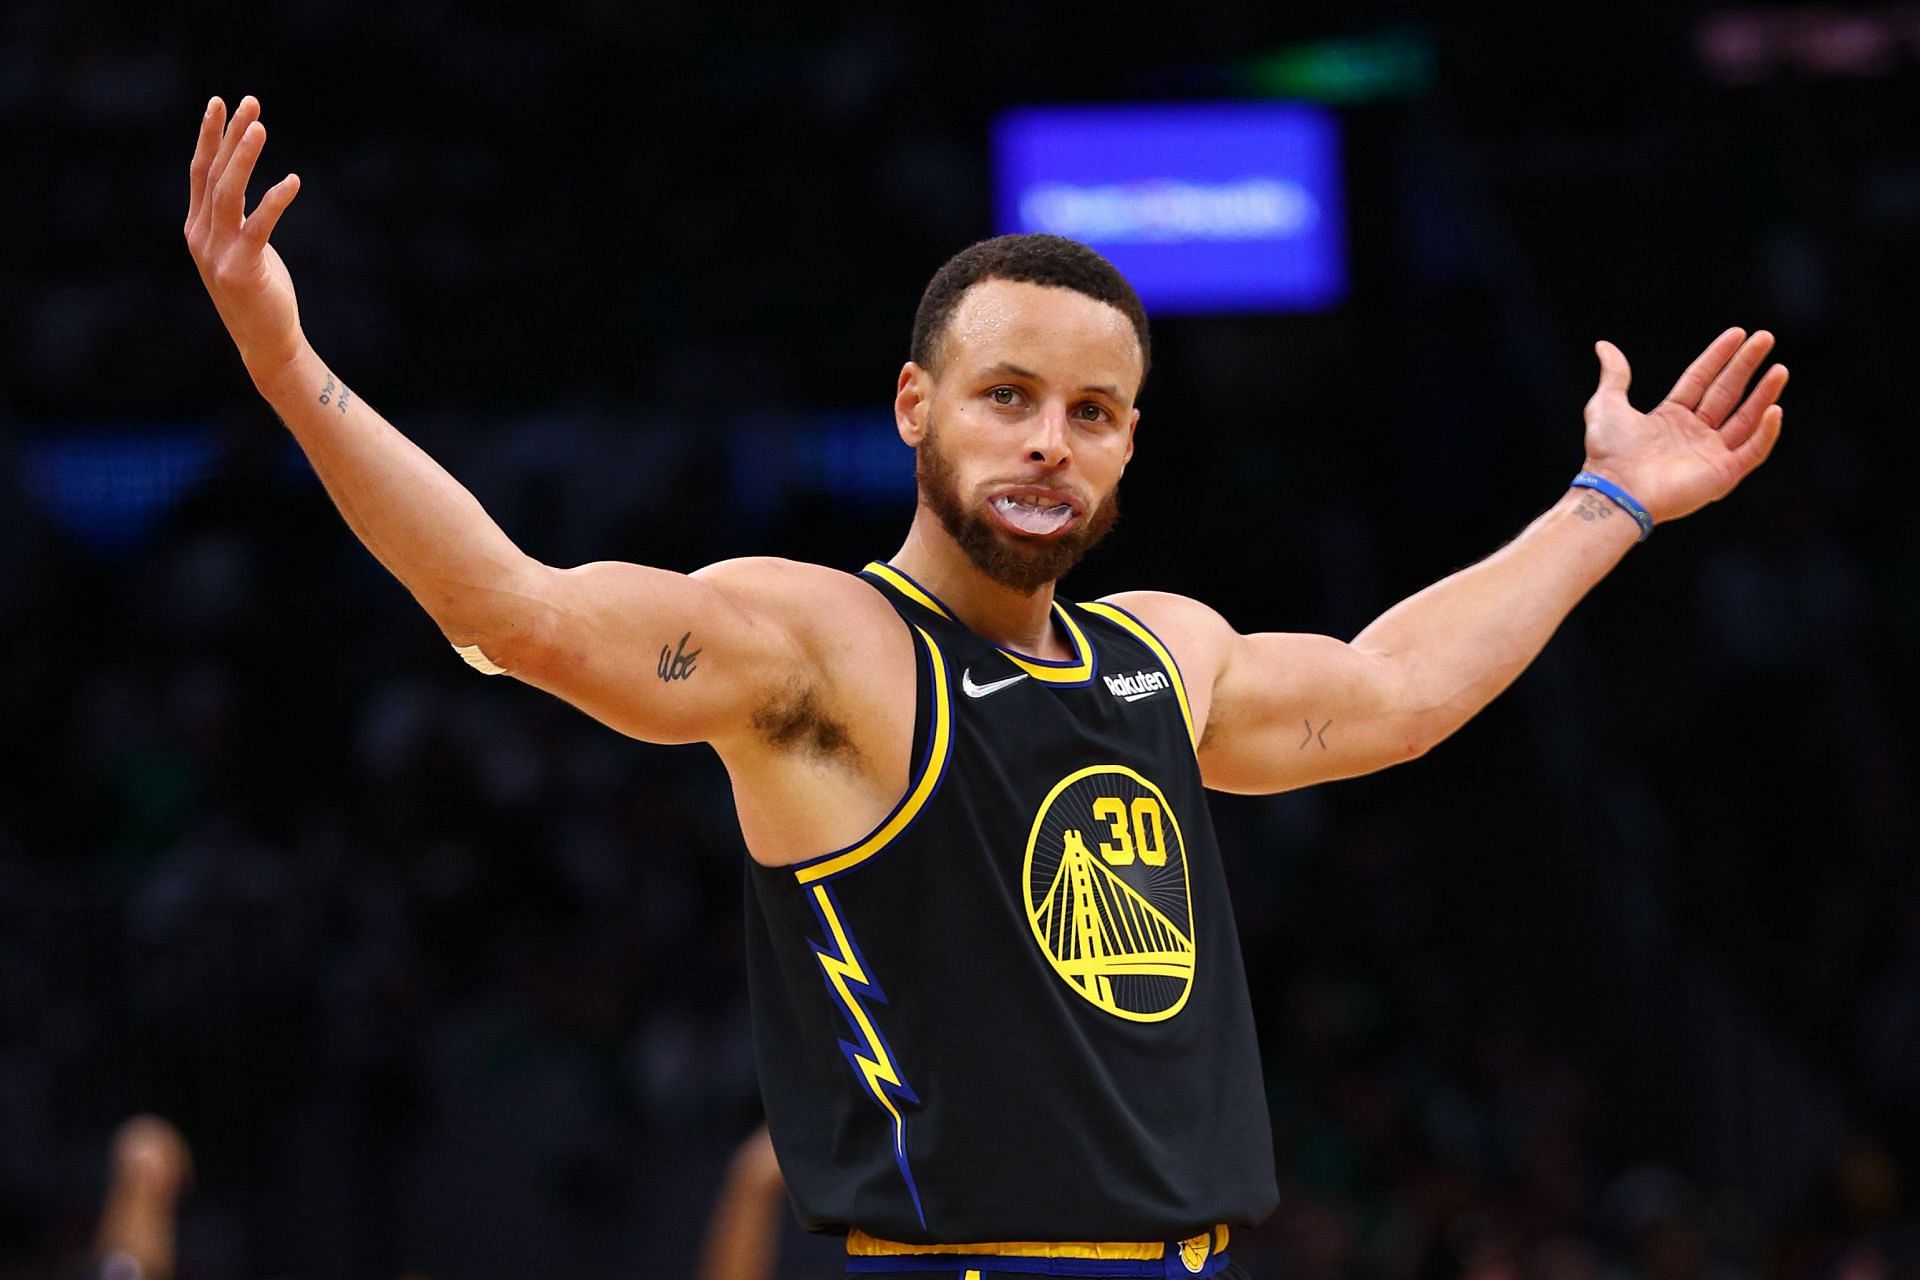 Steph Curry at the 2022 NBA Finals